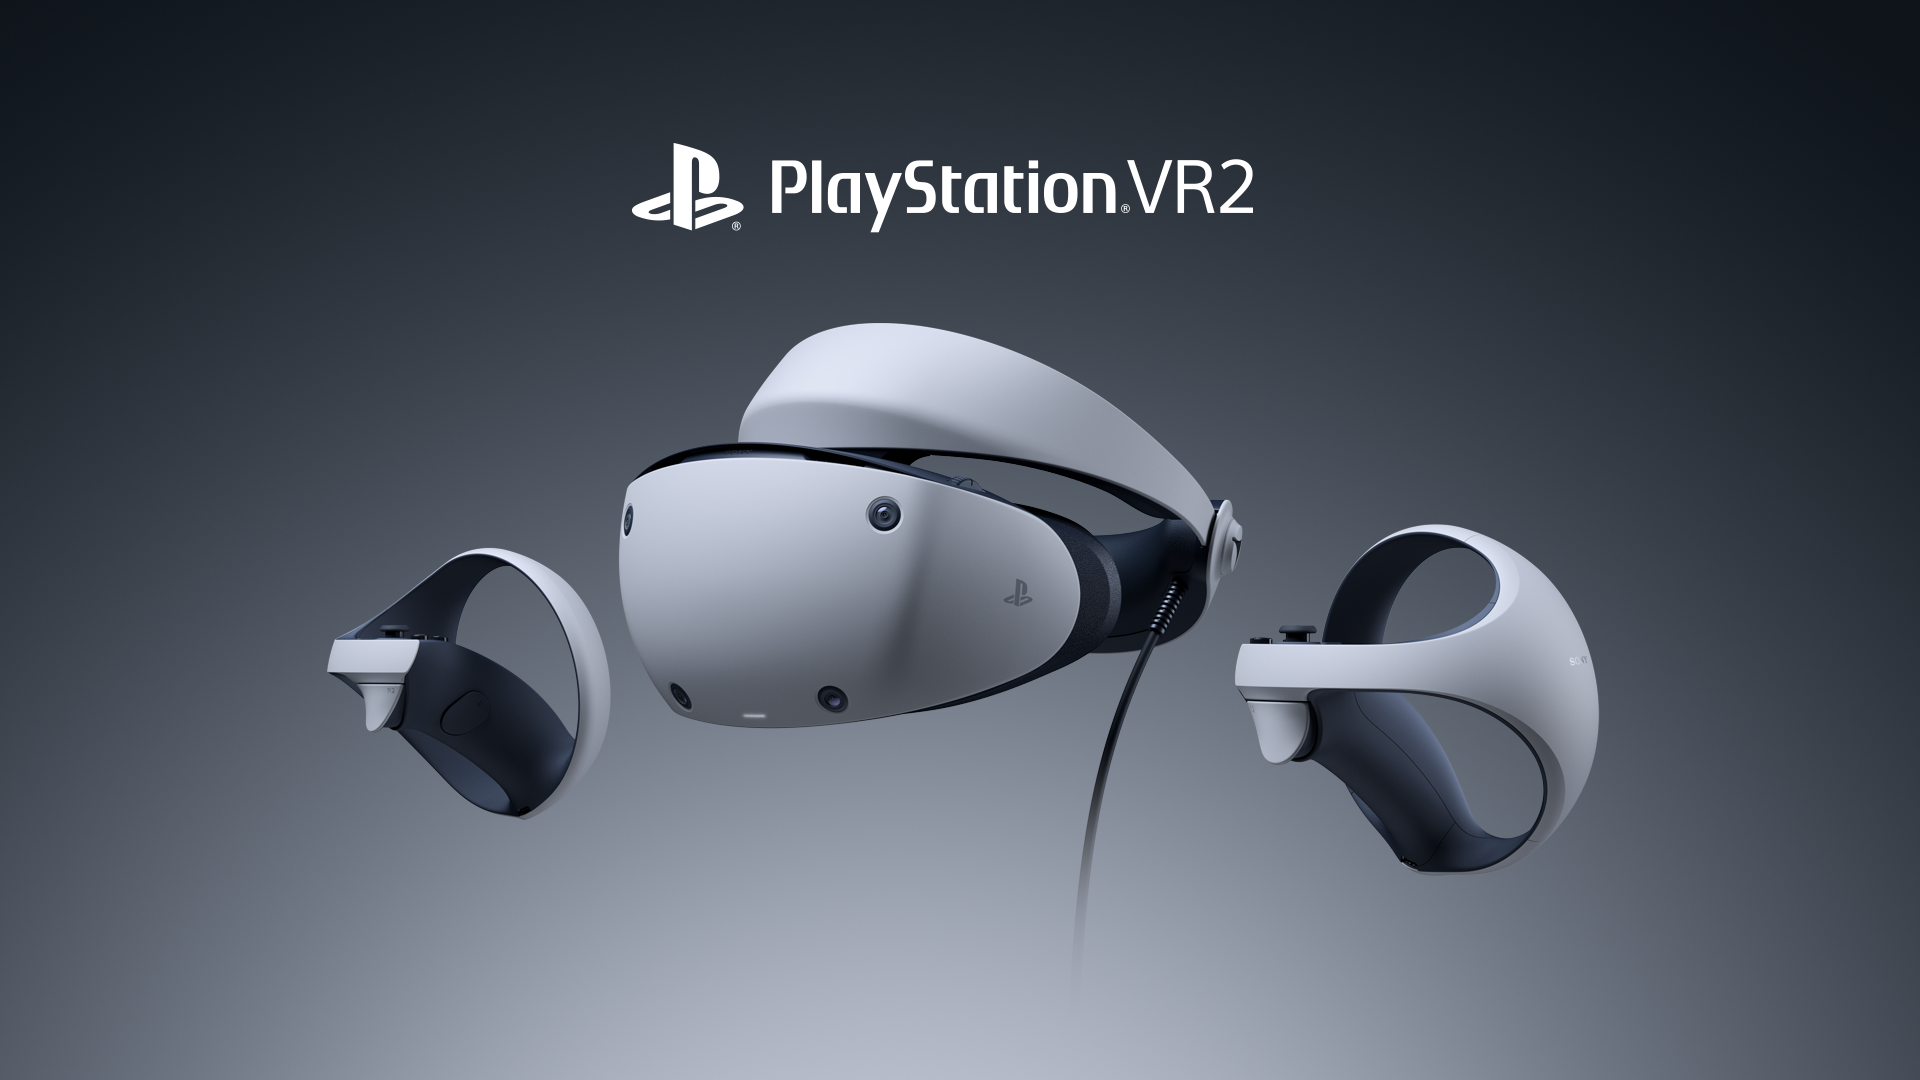 PSVR 2 review: Why Sony's latest PlayStation headset is not a must